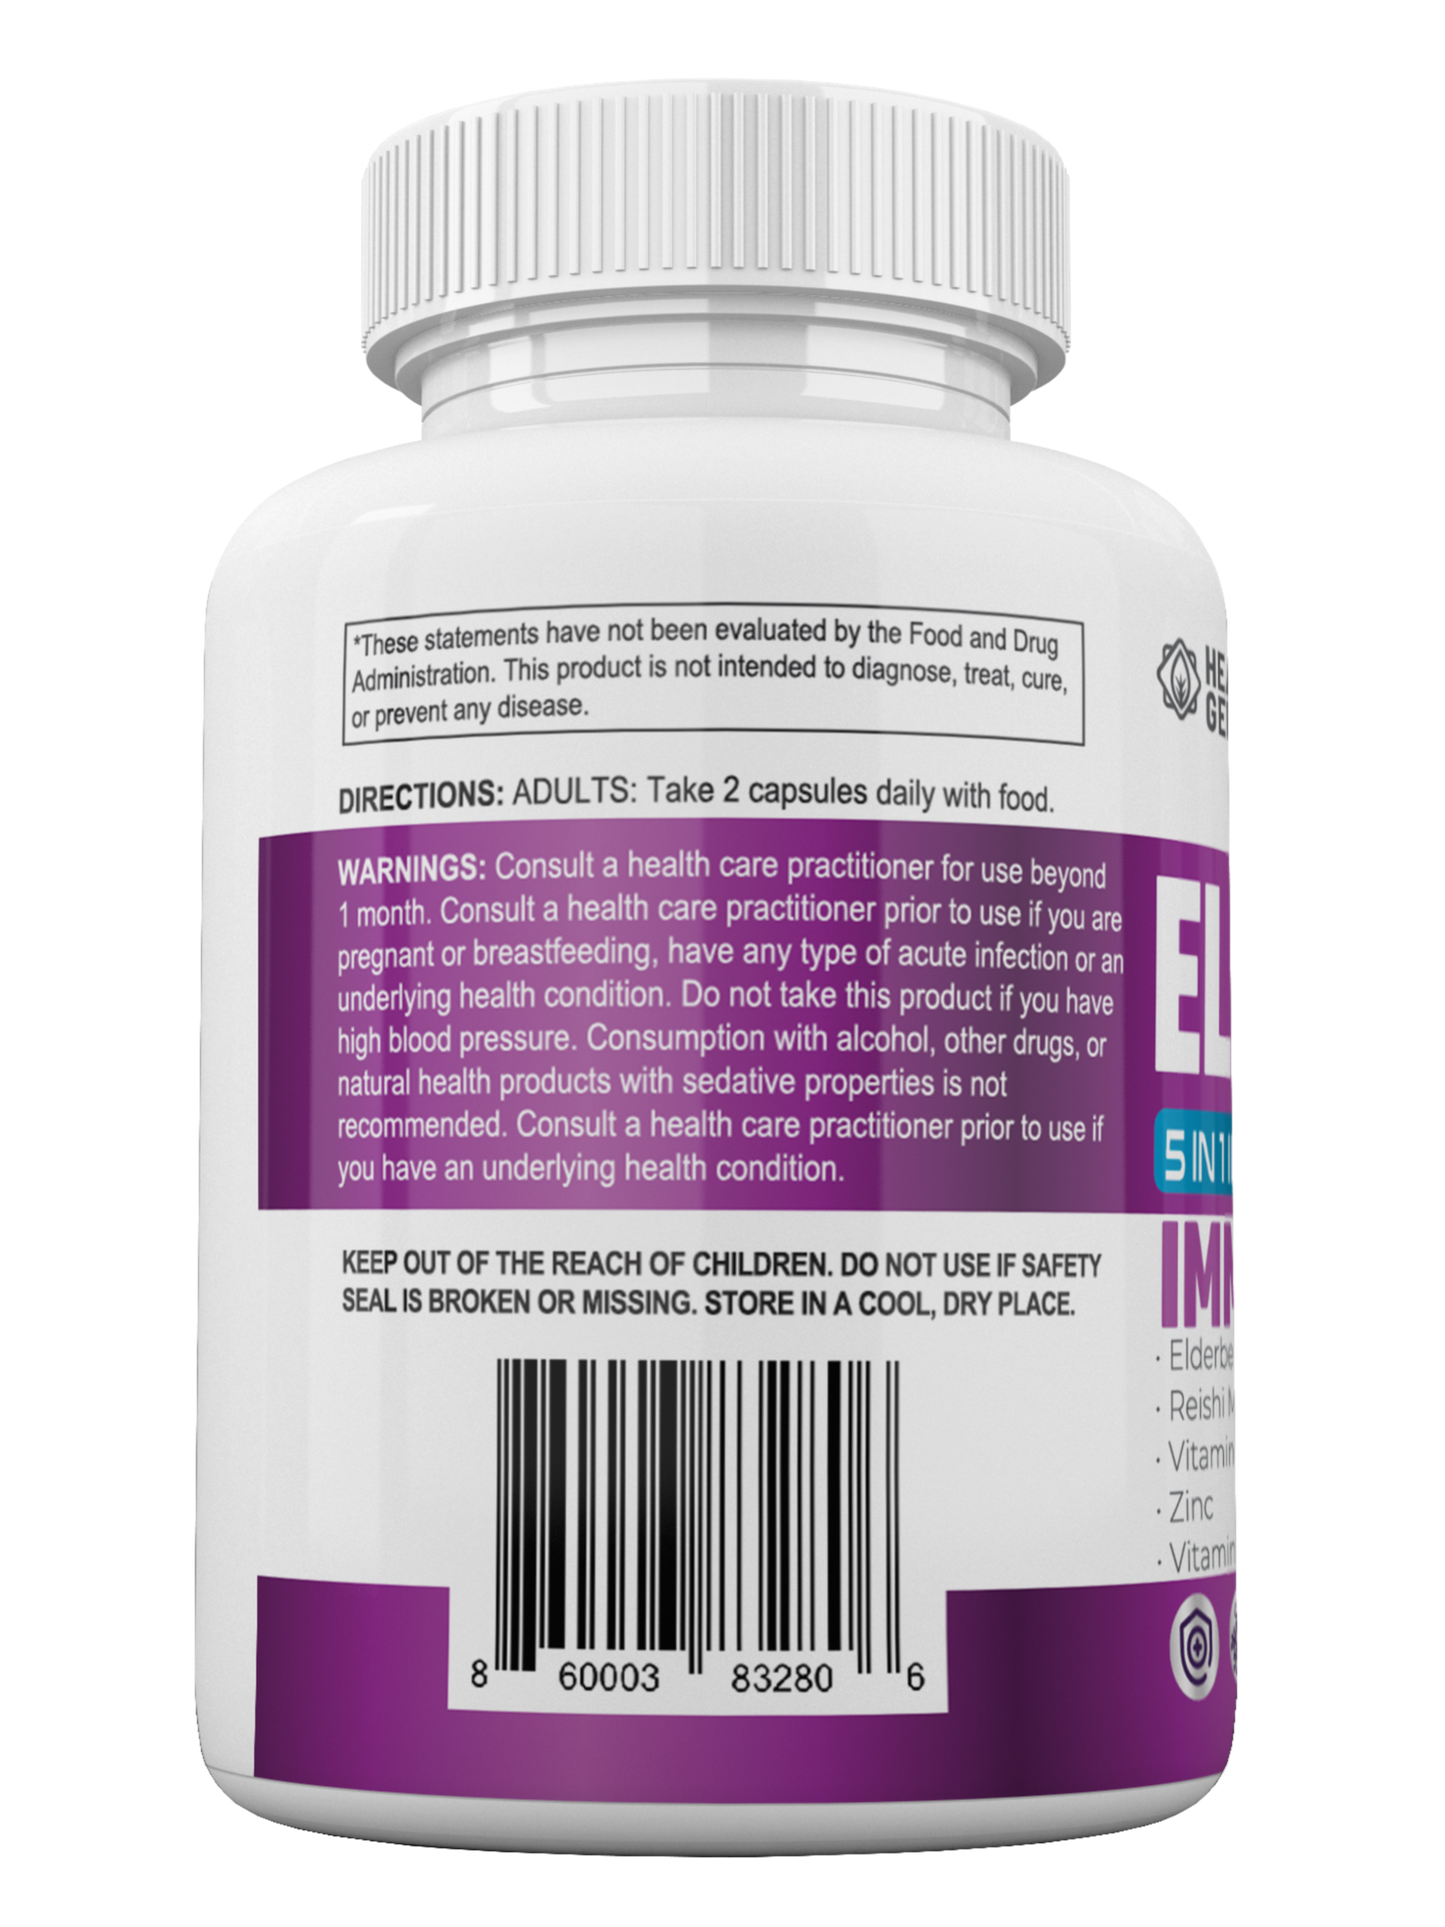 Elderberry 5-in-1 Immune Support Formula - Extra Strength Immunity Supplements - Reishi Extract, Vitamins C and D, Zinc Blend - Antioxidant, Energy Booster, Heart Health - 60 Capsules